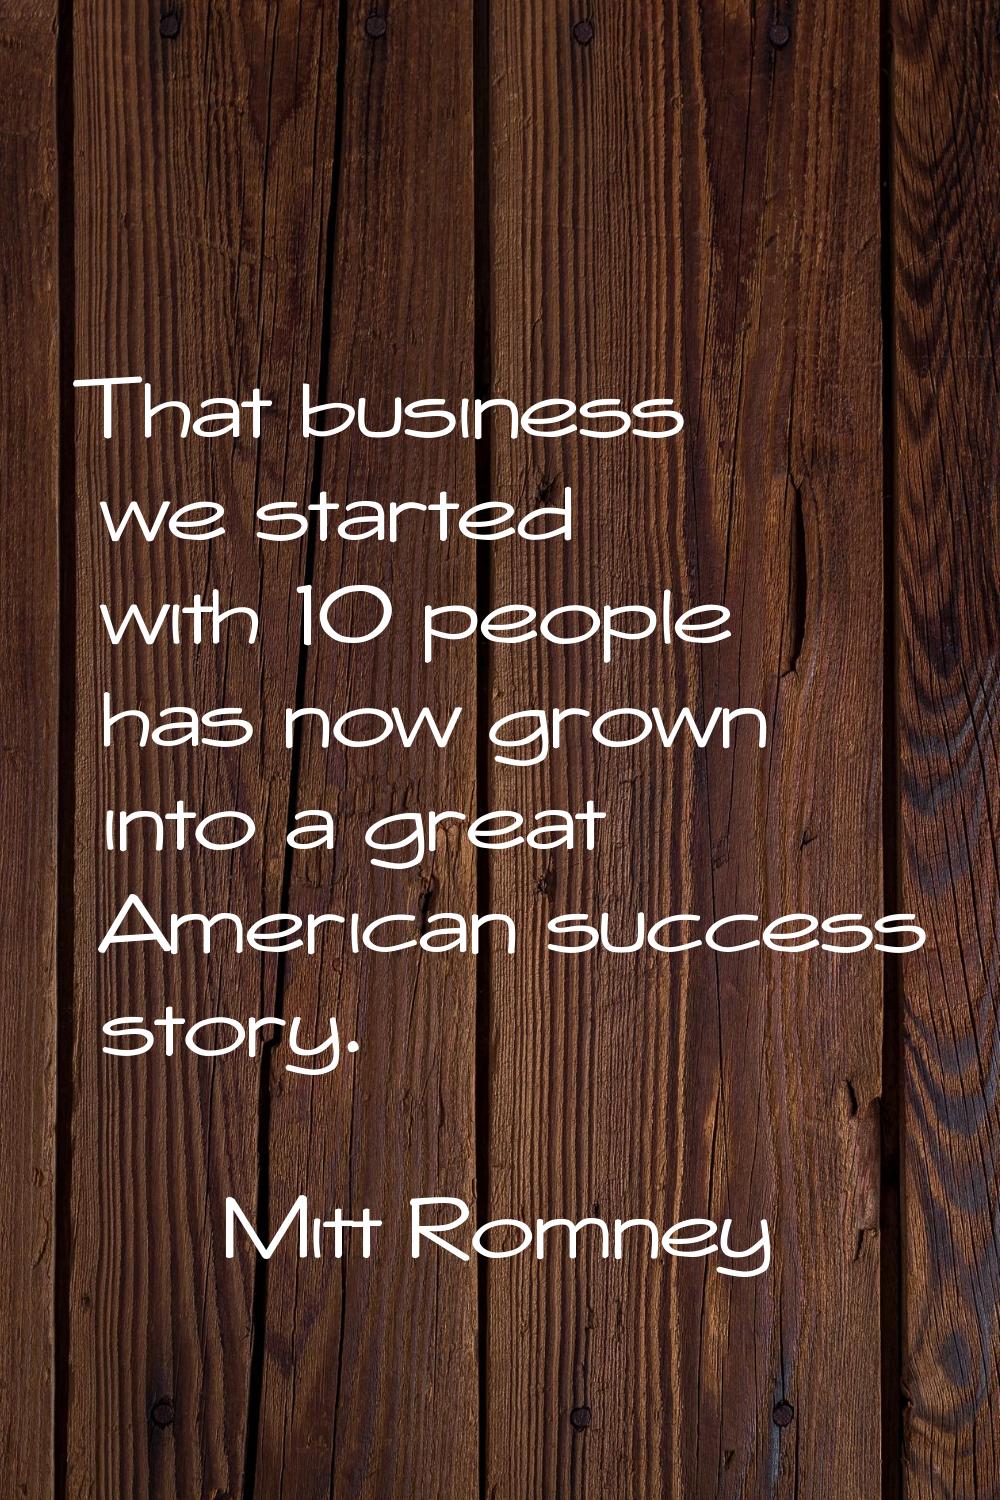 That business we started with 10 people has now grown into a great American success story.